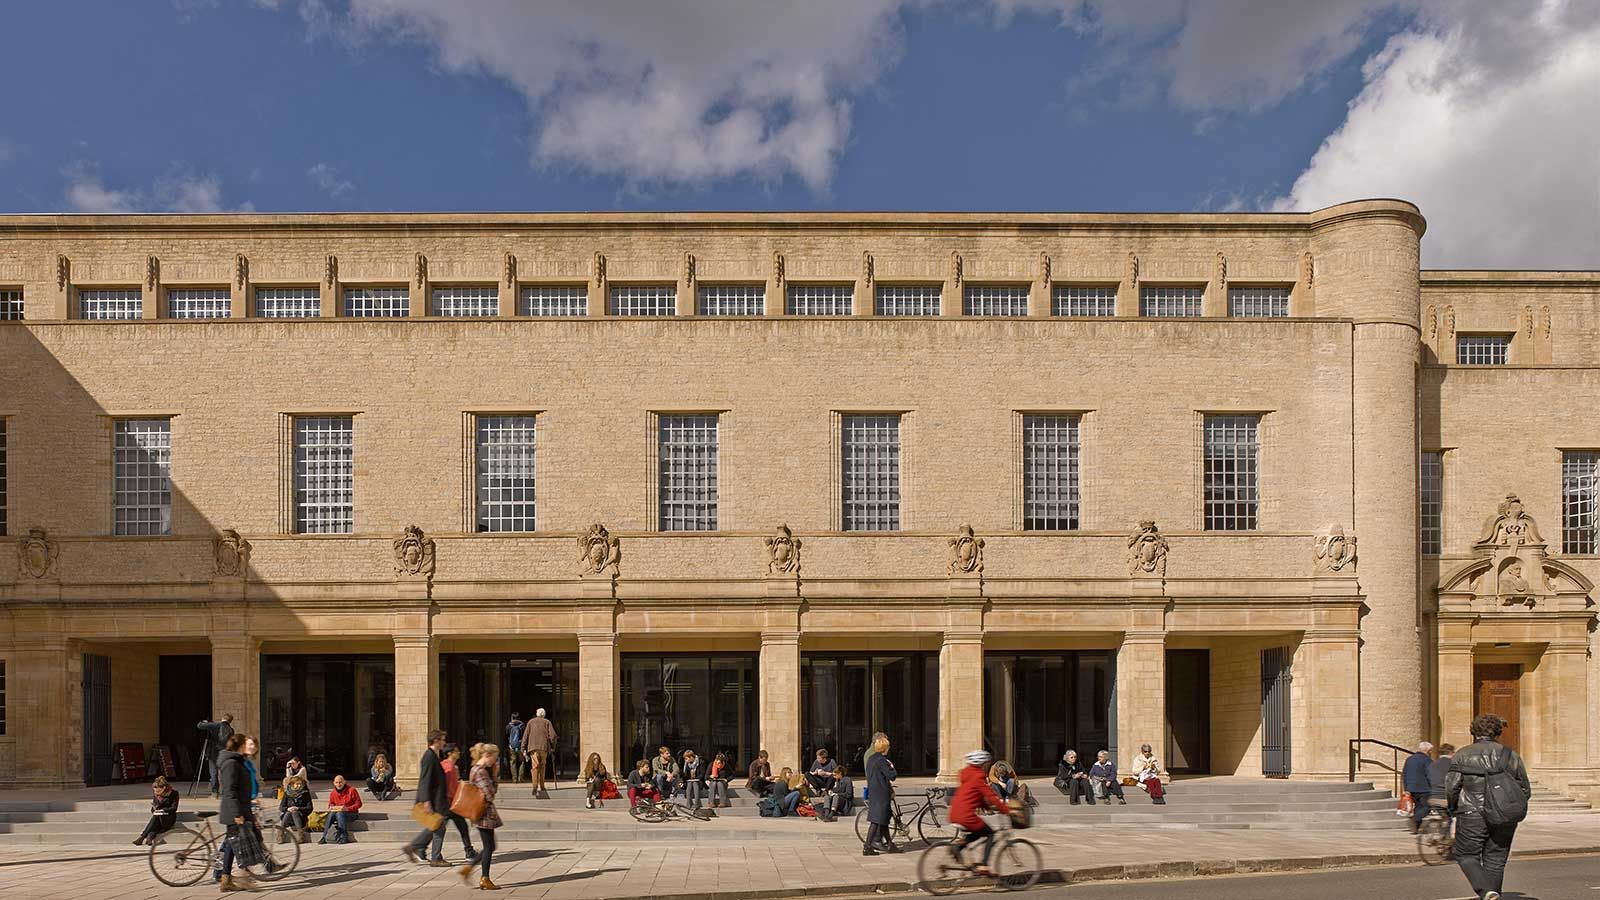 Bodleian Library Building Exterior Day View - Mace Group